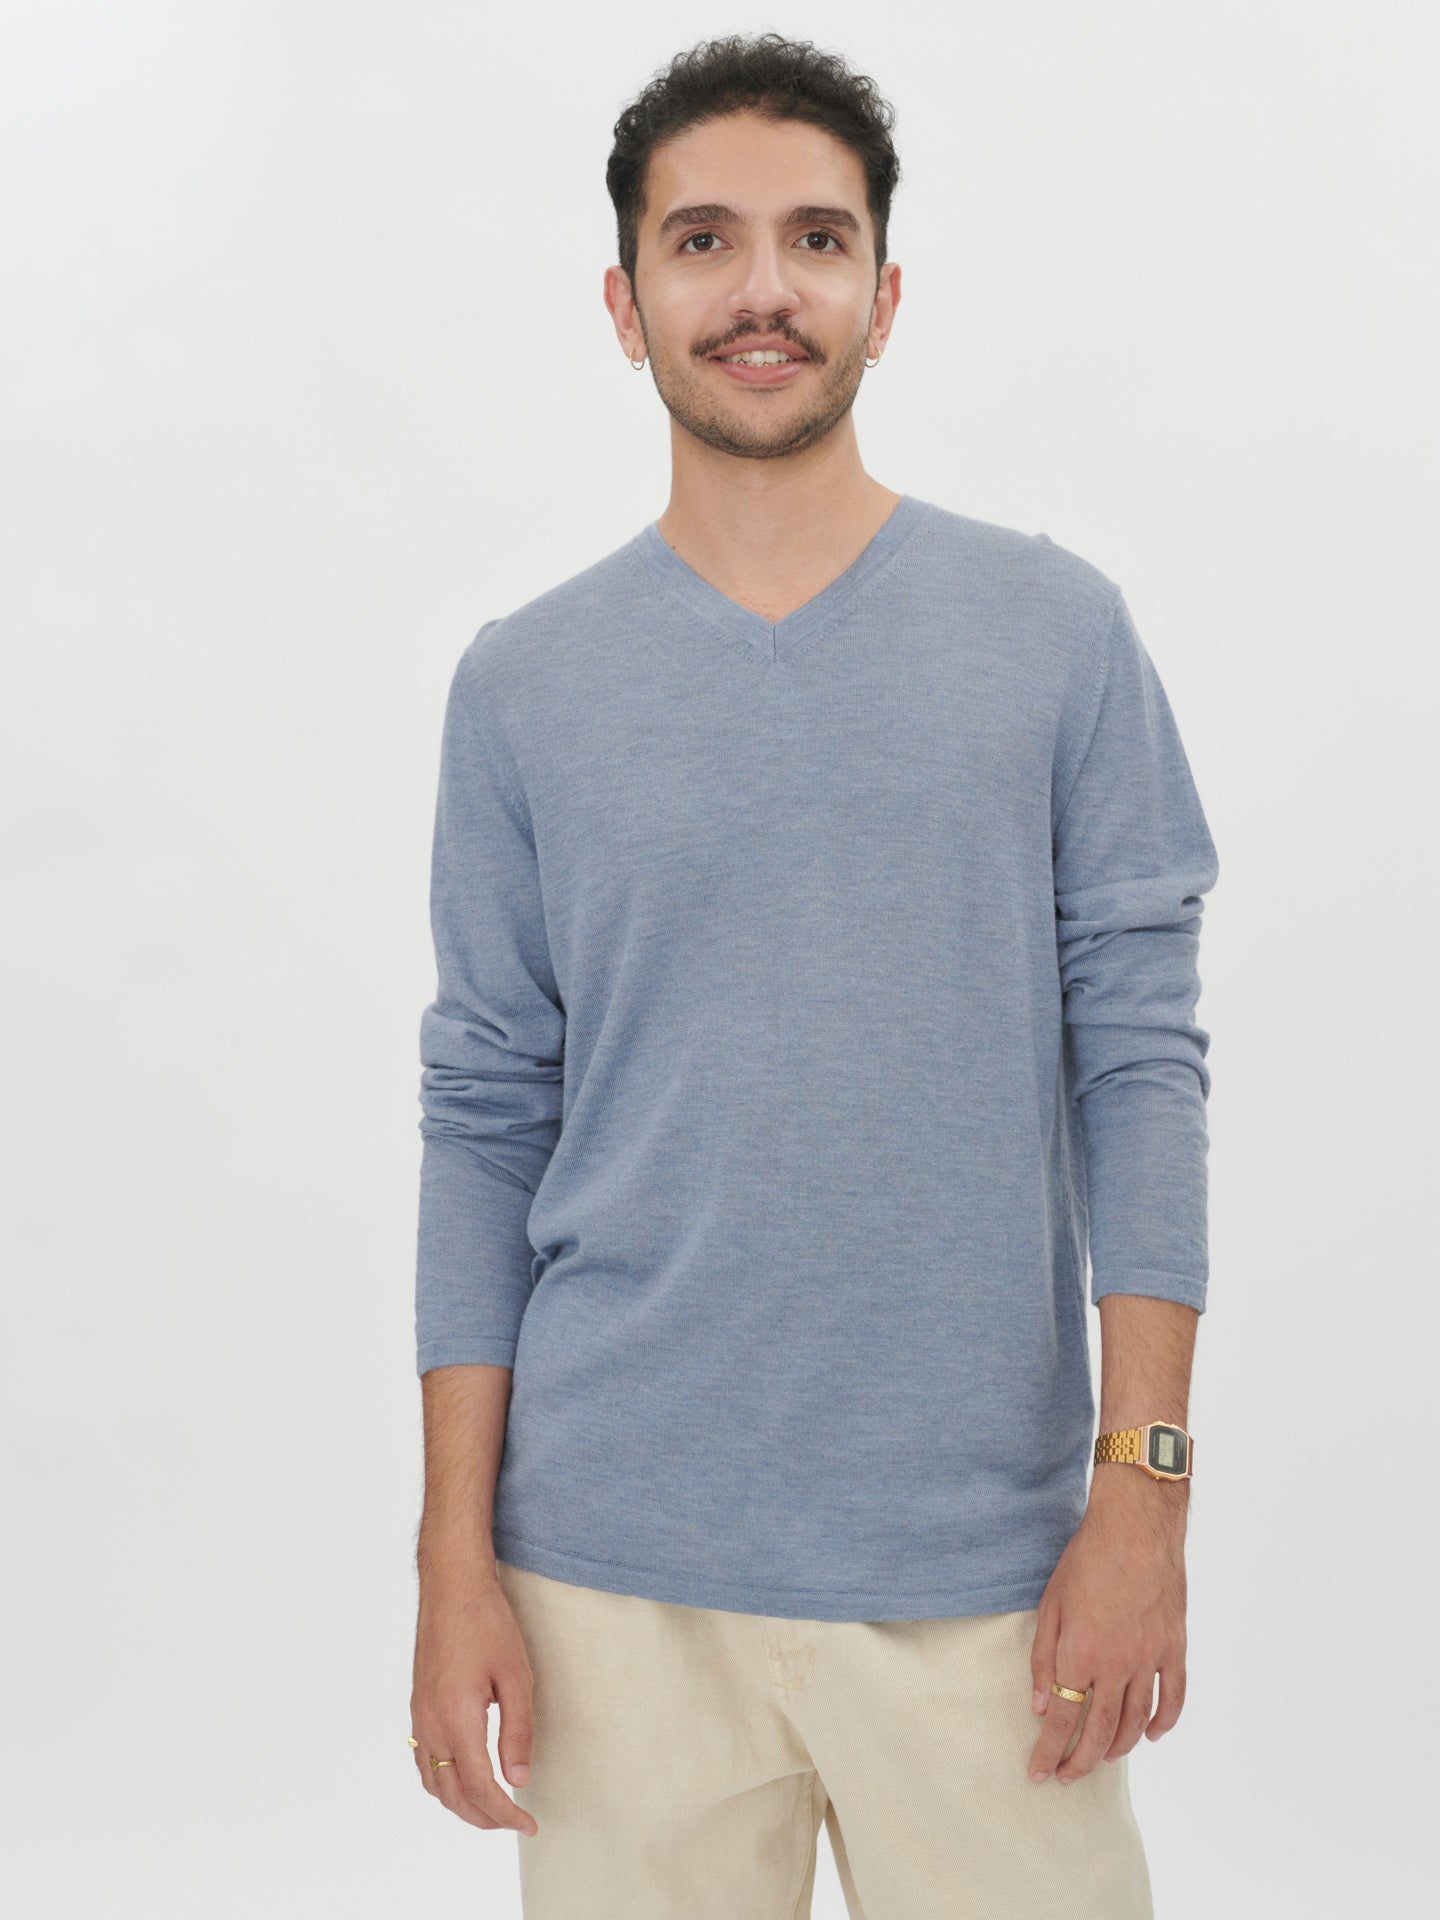 Shop the spring/ summer 23 cashmere collection for men